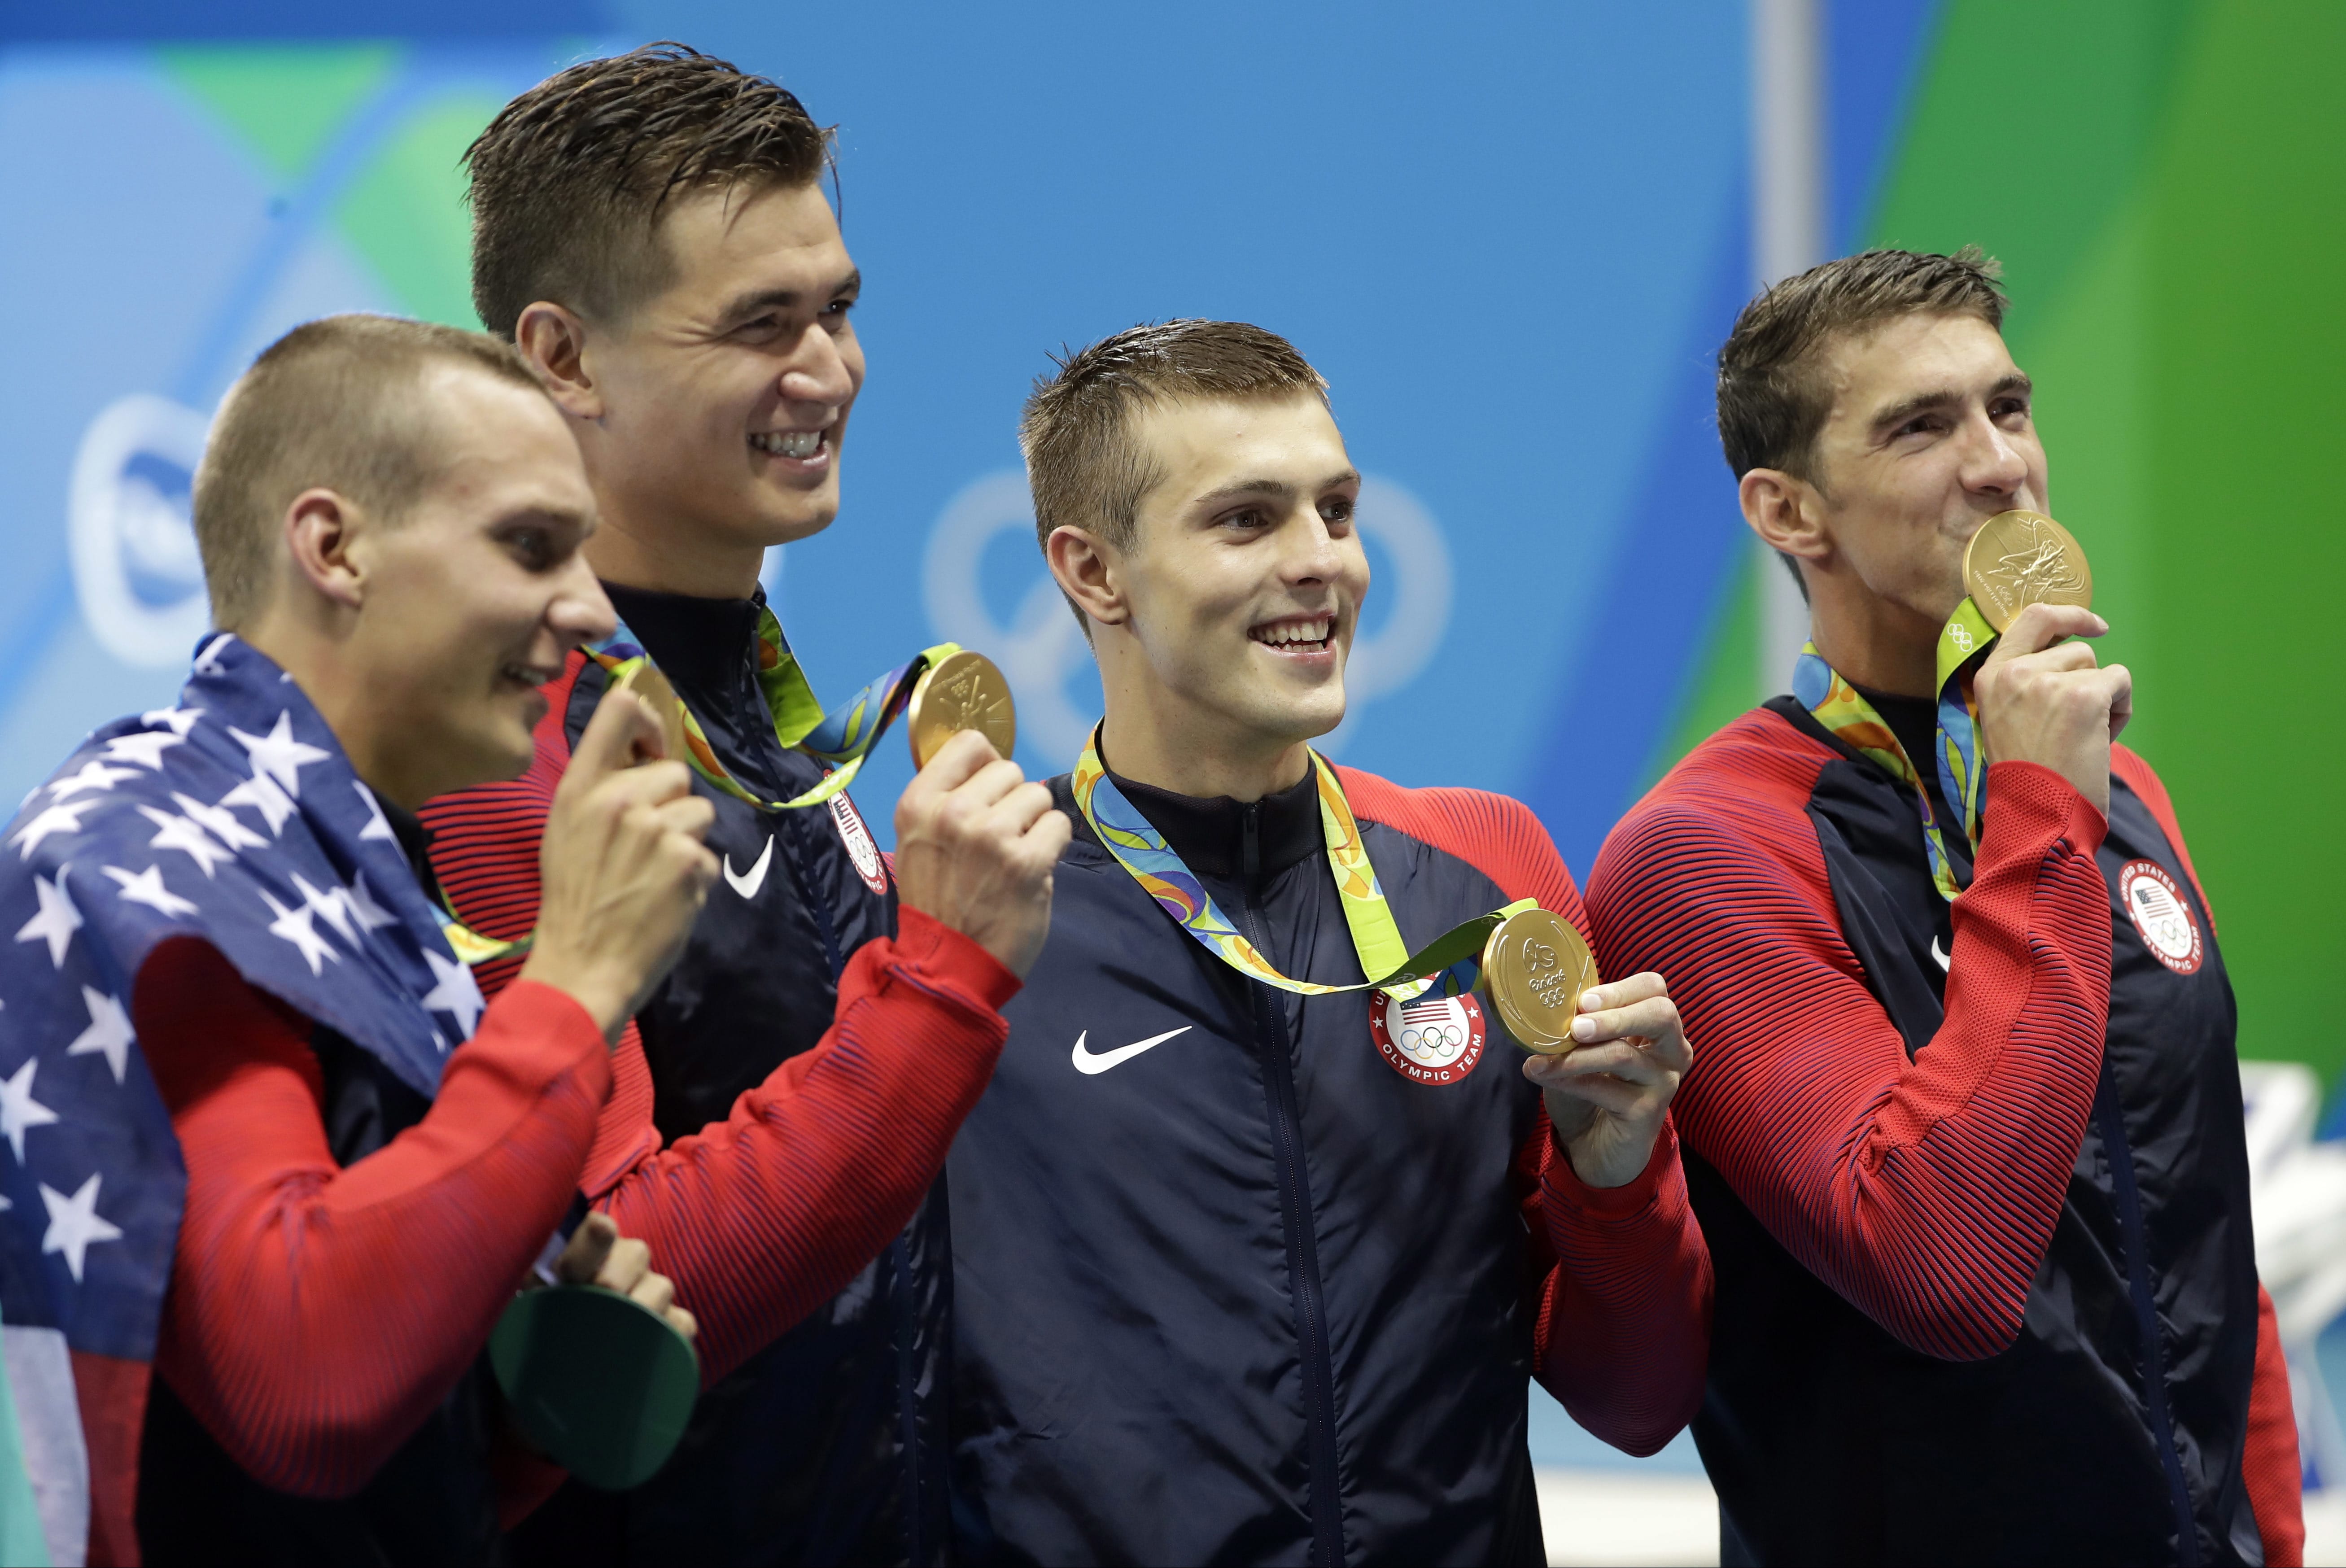 The United States team from left, Caeleb Dressel, Nathan Adrian, Ryan Held and Michael Phelps celebrate after winning the gold medal in the men's 4x100-meter freestyle relay during the swimming competitions at the 2016 Summer Olympics, Monday, Aug. 8, 2016, in Rio de Janeiro, Brazil.